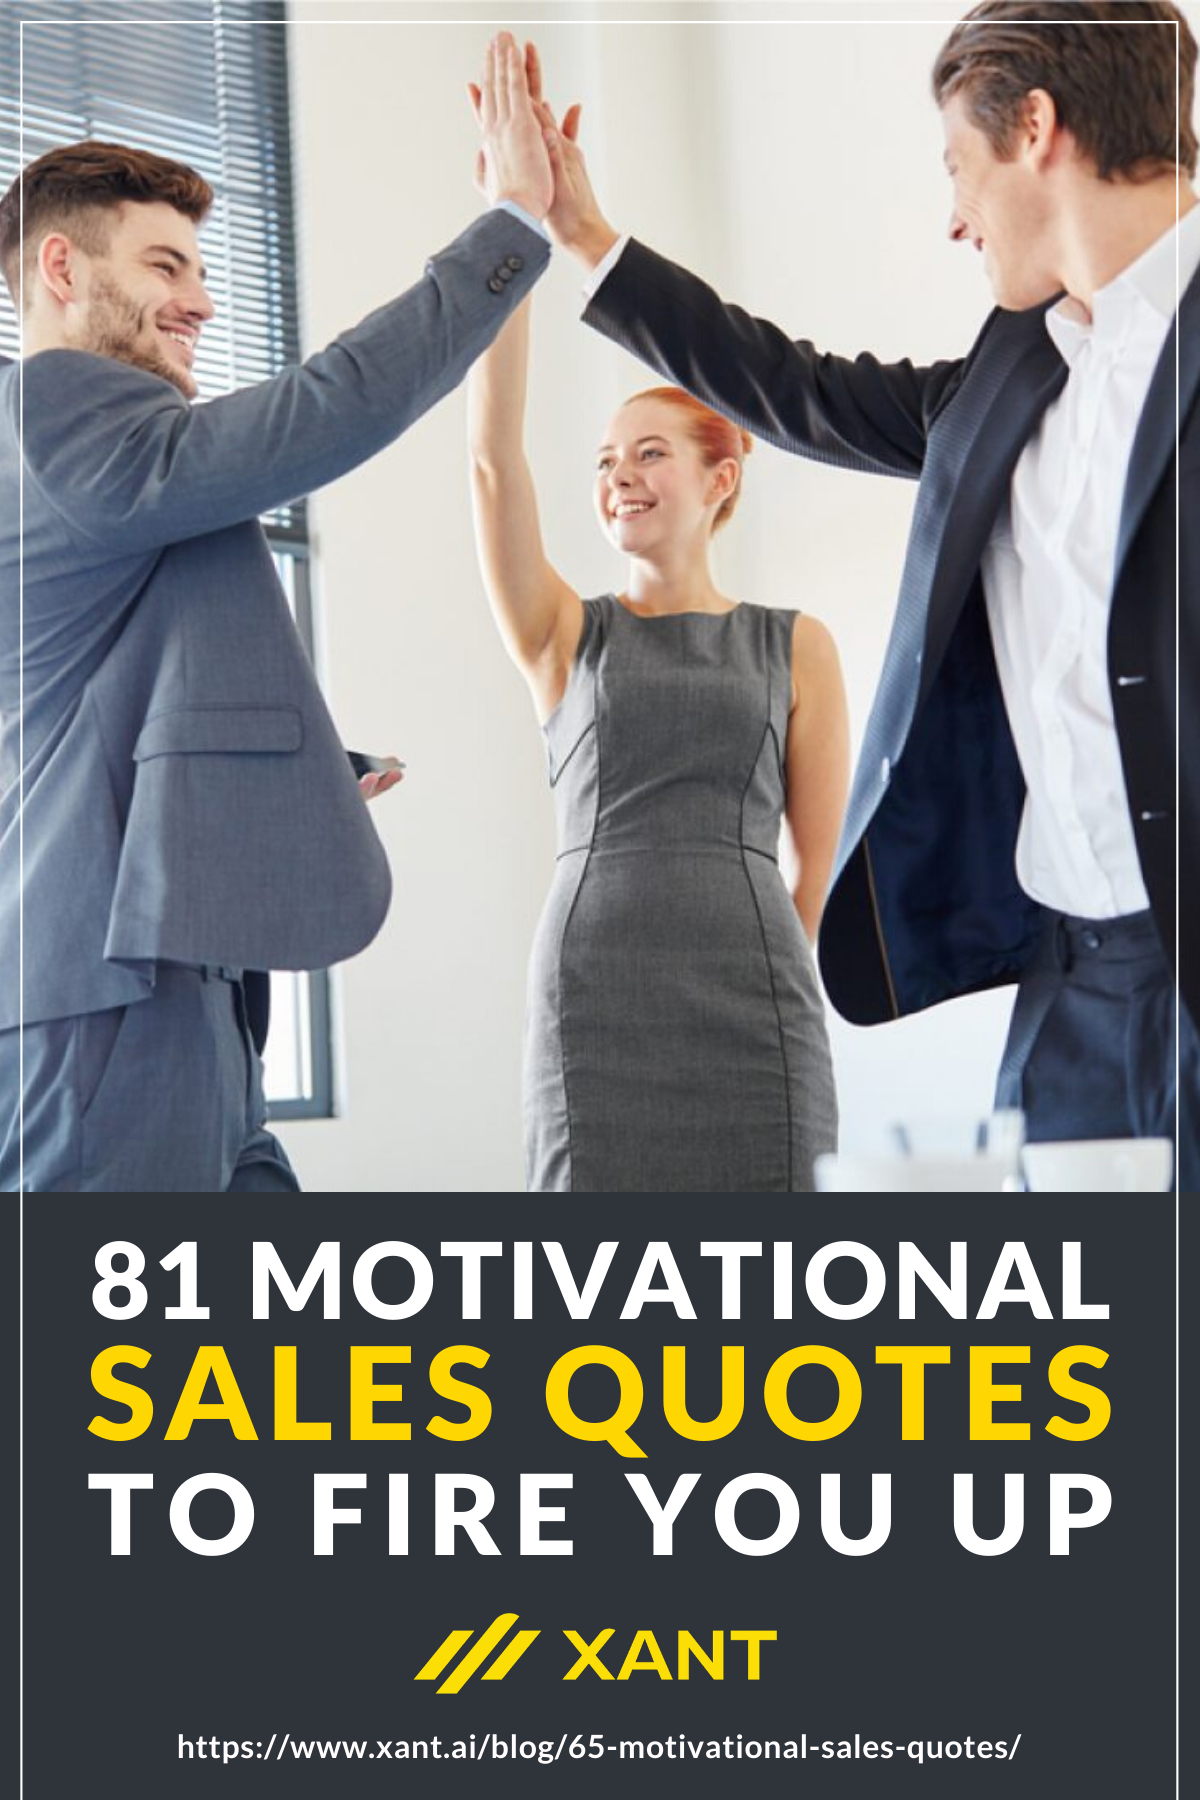 81 Motivational Sales Quotes To Fire You Up [INFOGRAPHIC] | https://resources.insidesales.com/blog/65-motivational-sales-quotes/